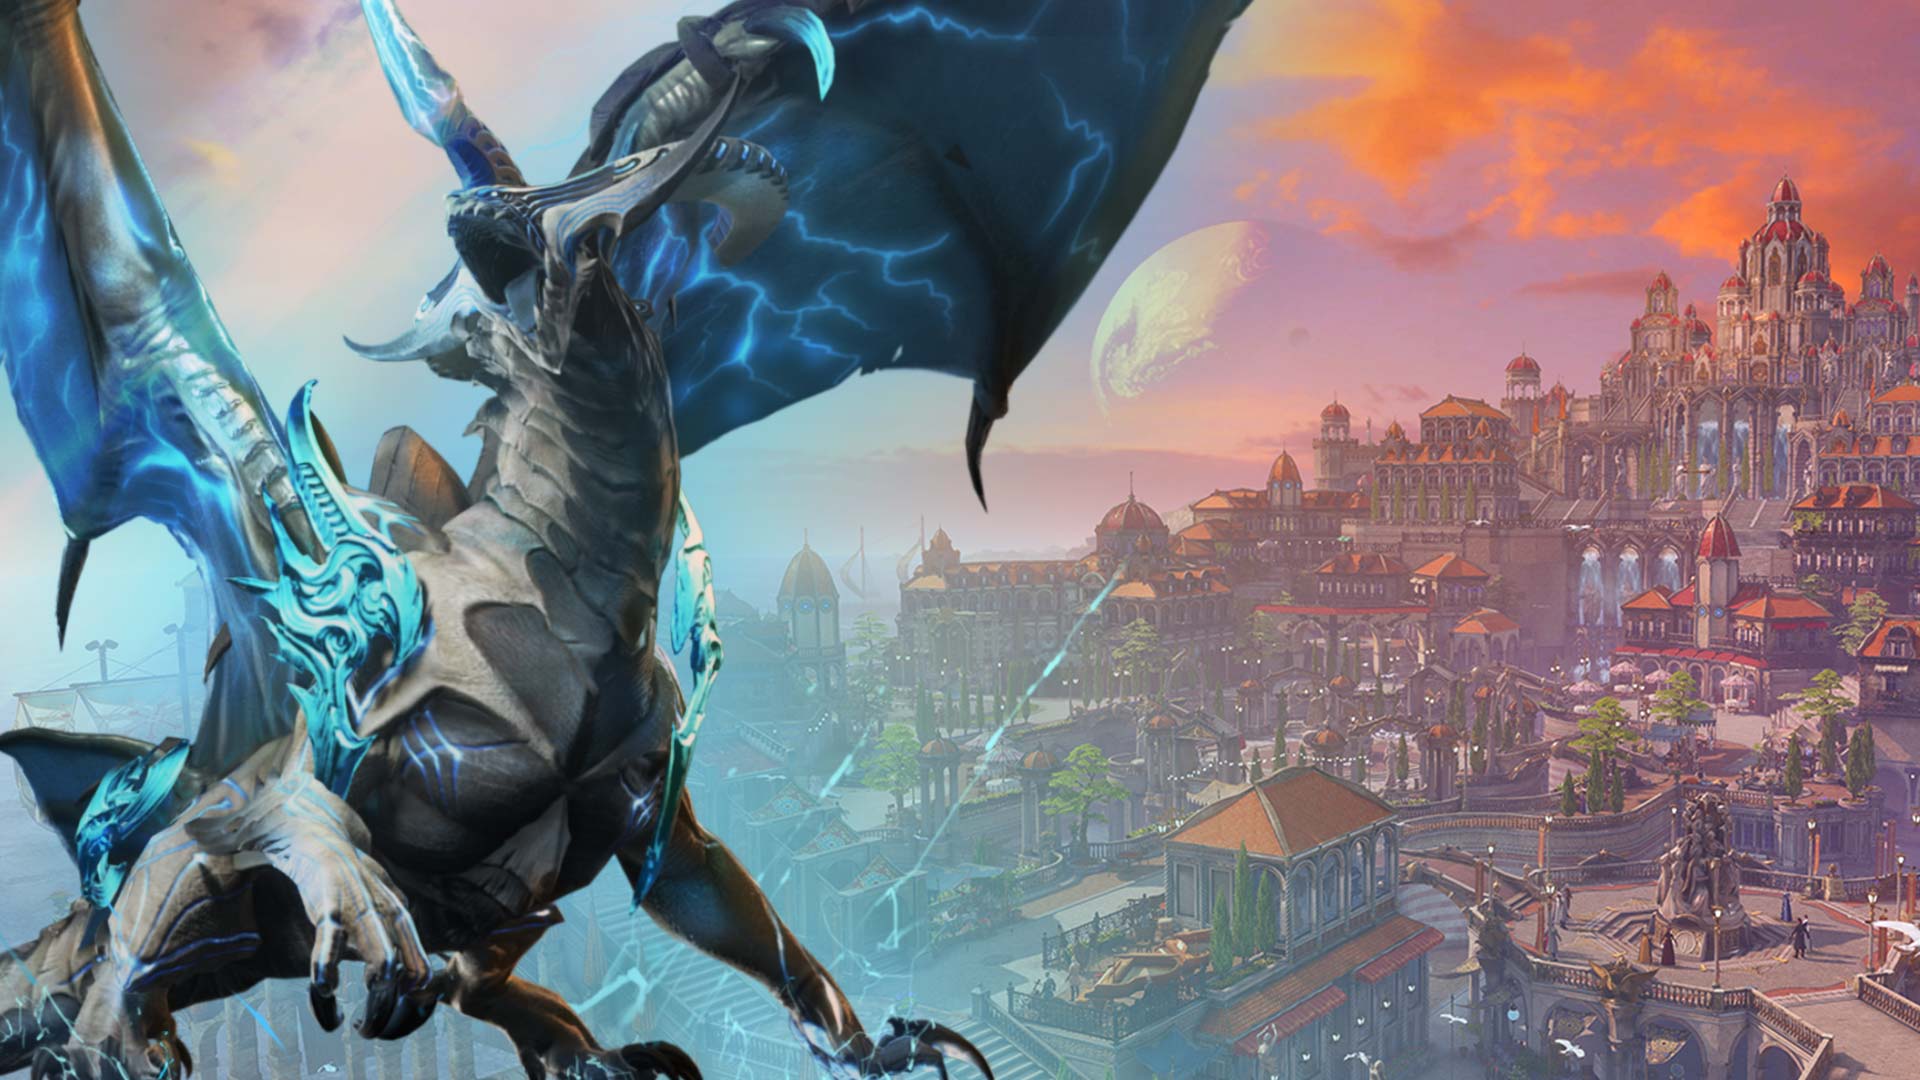 The Daily Grind: What things do MMOs do pre-launch that look like